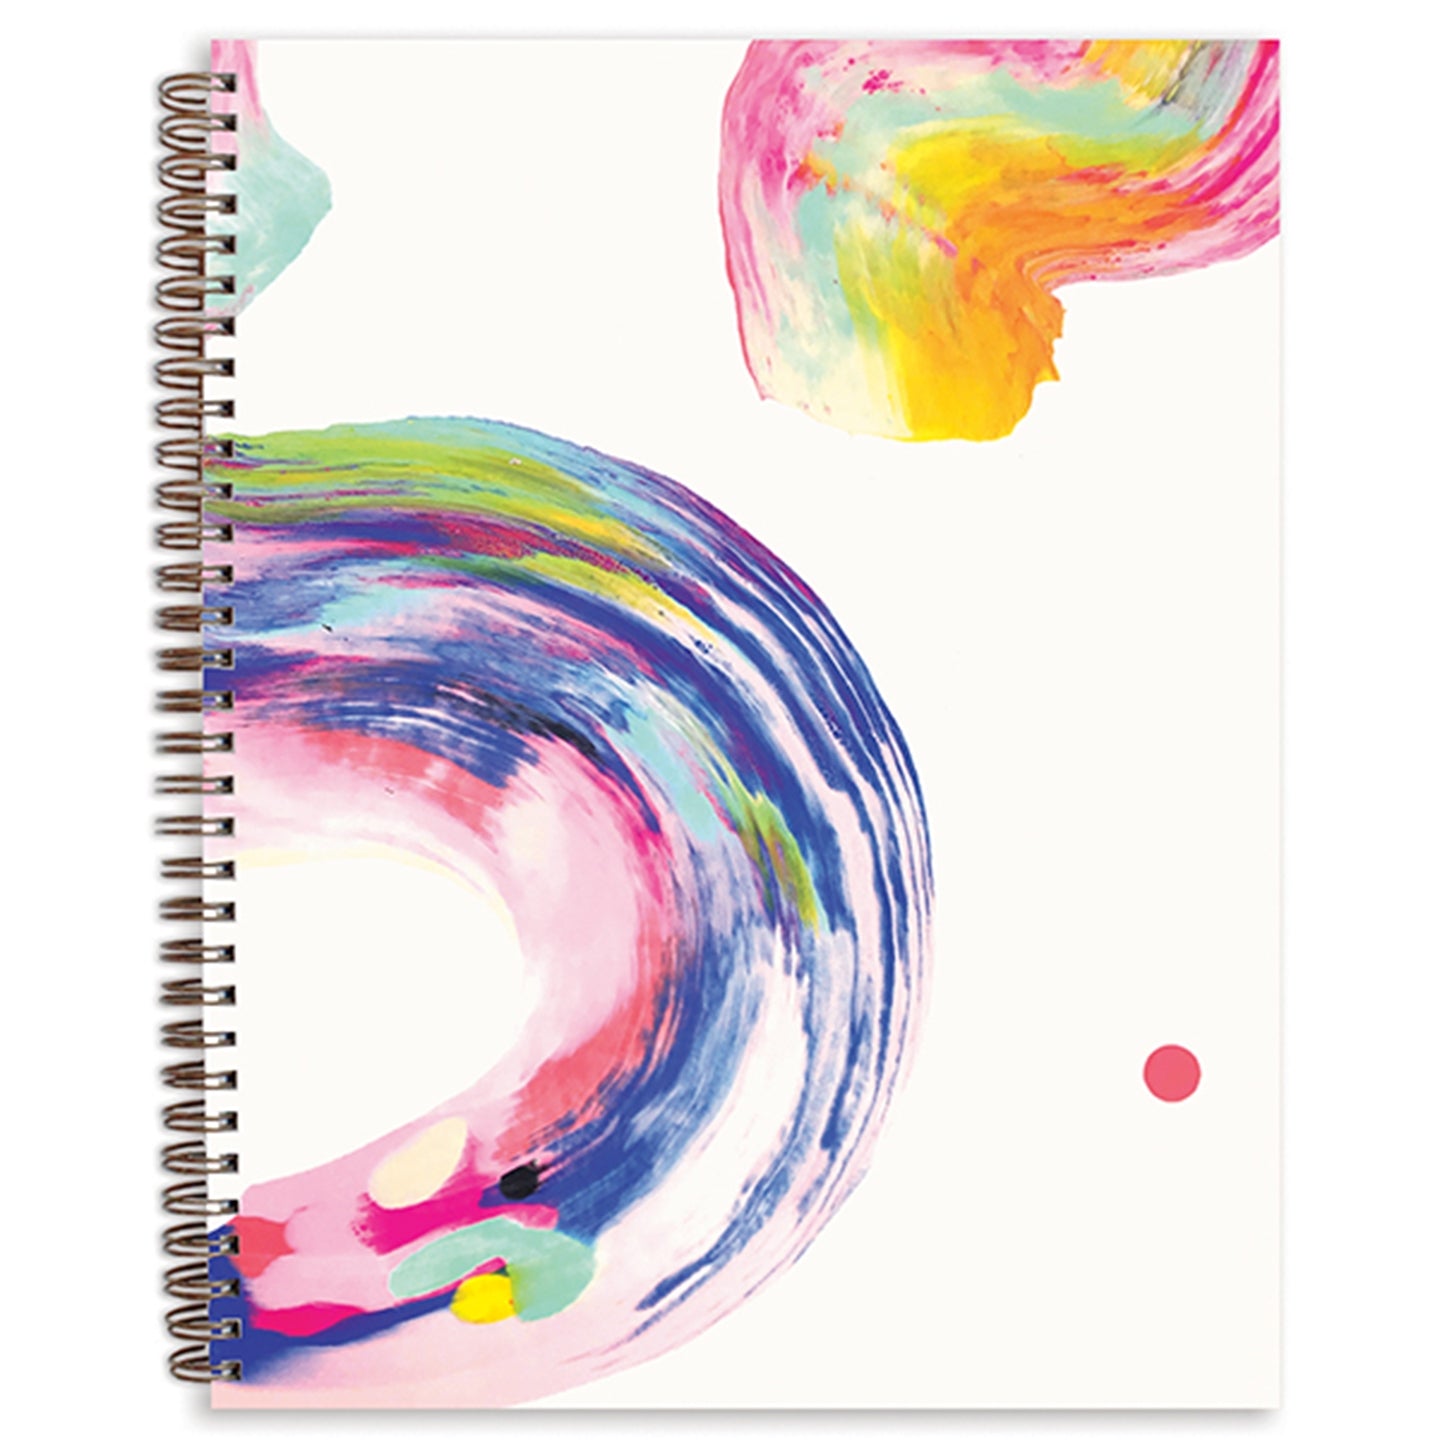 Sketchbook with Hand Painted Candy Swirl Cover